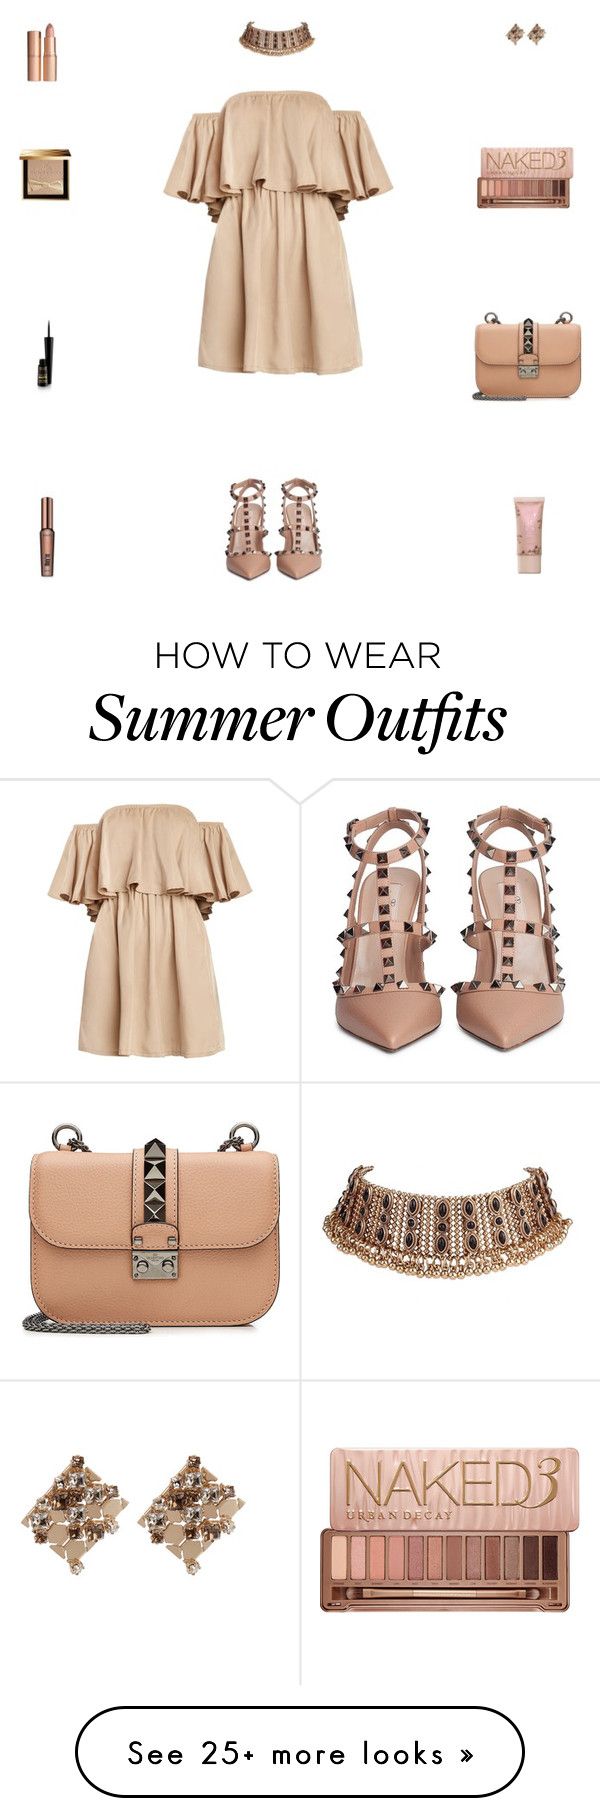 "Contest: Beige Summer Chic Outfit" by billsacred on Polyvore featurin...